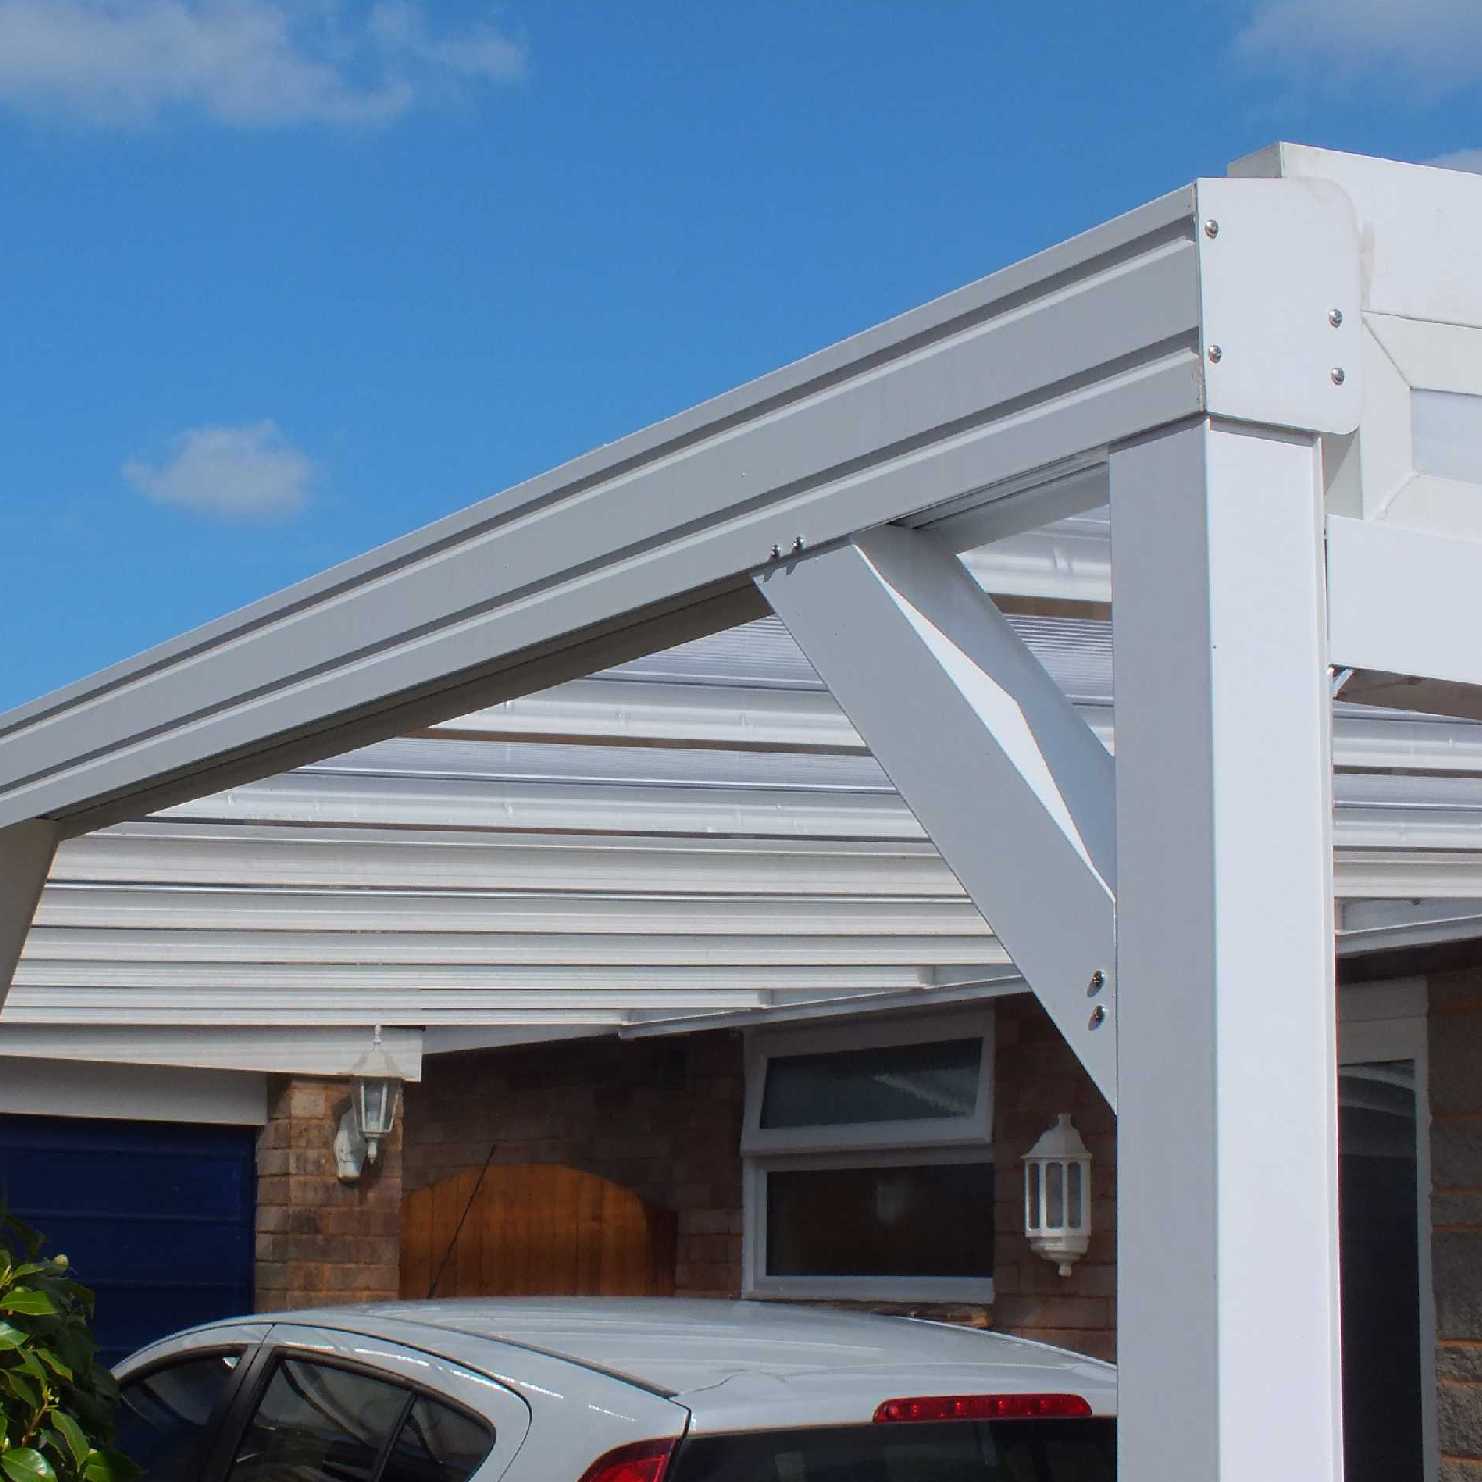 Great deals on Omega Smart Lean-To Canopy, White with 16mm Polycarbonate Glazing - 9.5m (W) x 2.5m (P), (5) Supporting Posts